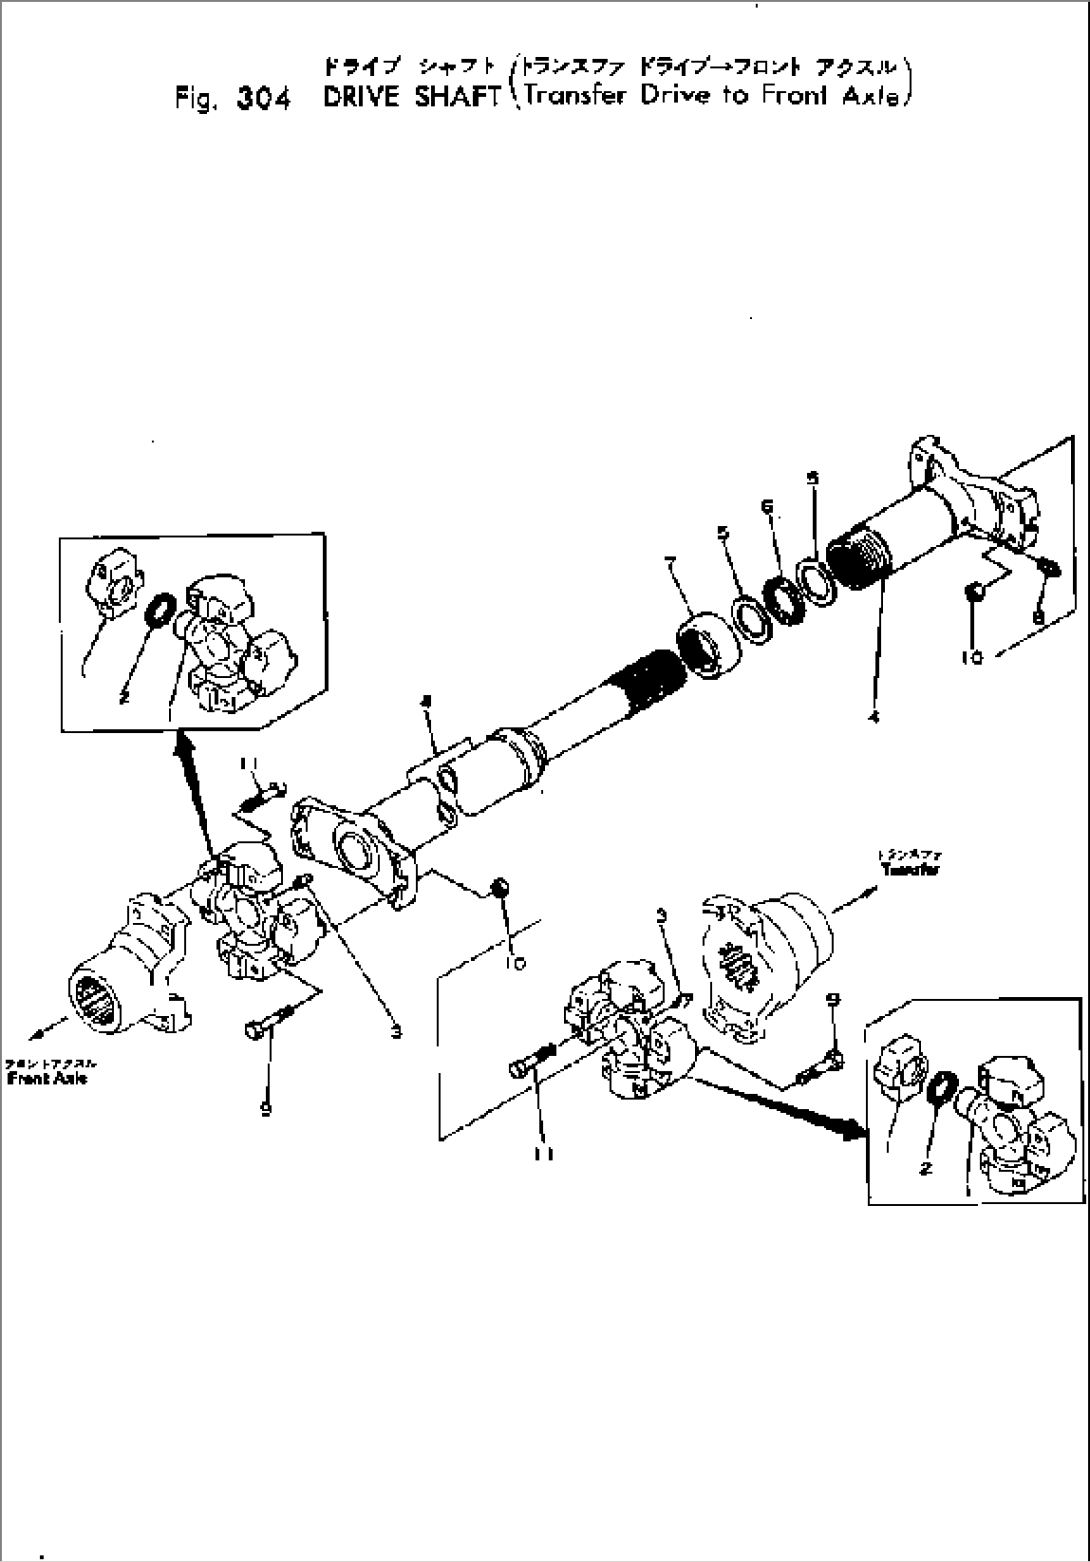 DRIVE SHAFT (TRANSFER DRIVE TO FRONT AXLE)